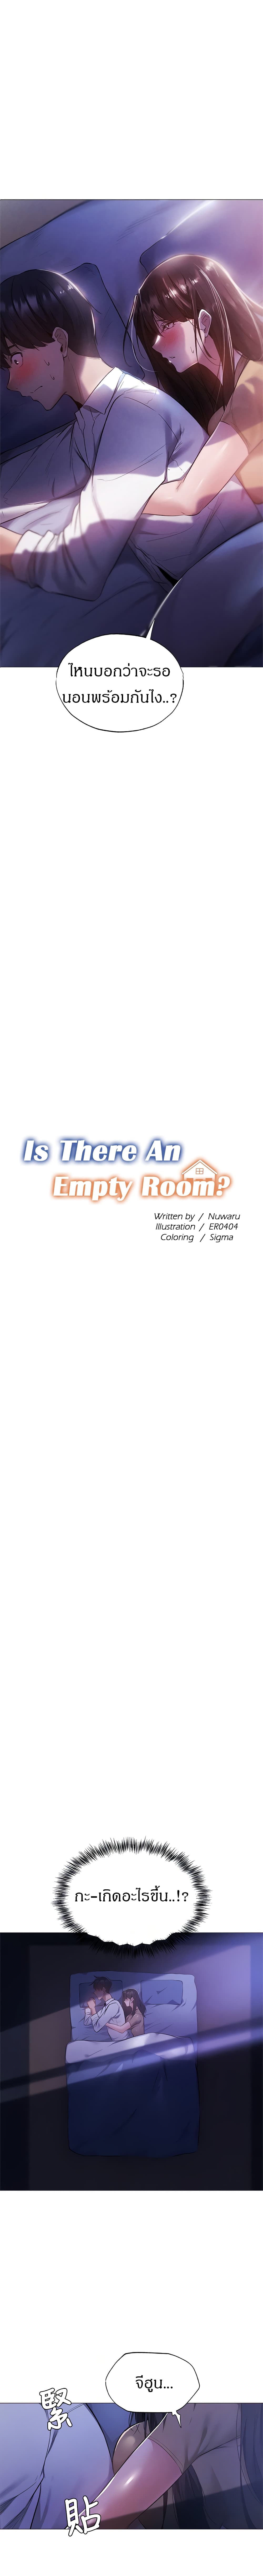 Is There an Empty Room